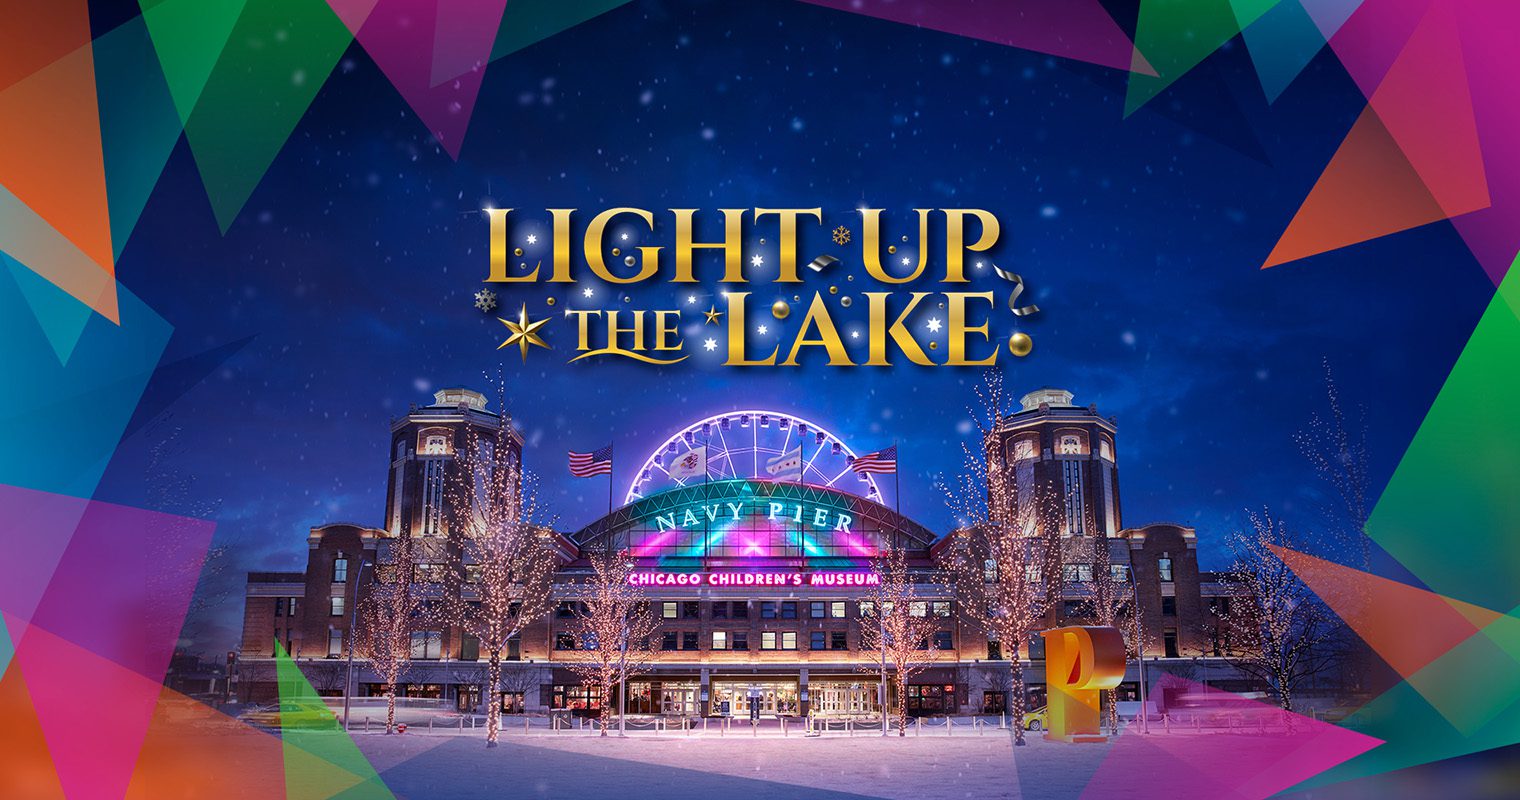 Navy Pier to Launch Light Up the Lake, an Indoor Holiday Light-sculpture Experience